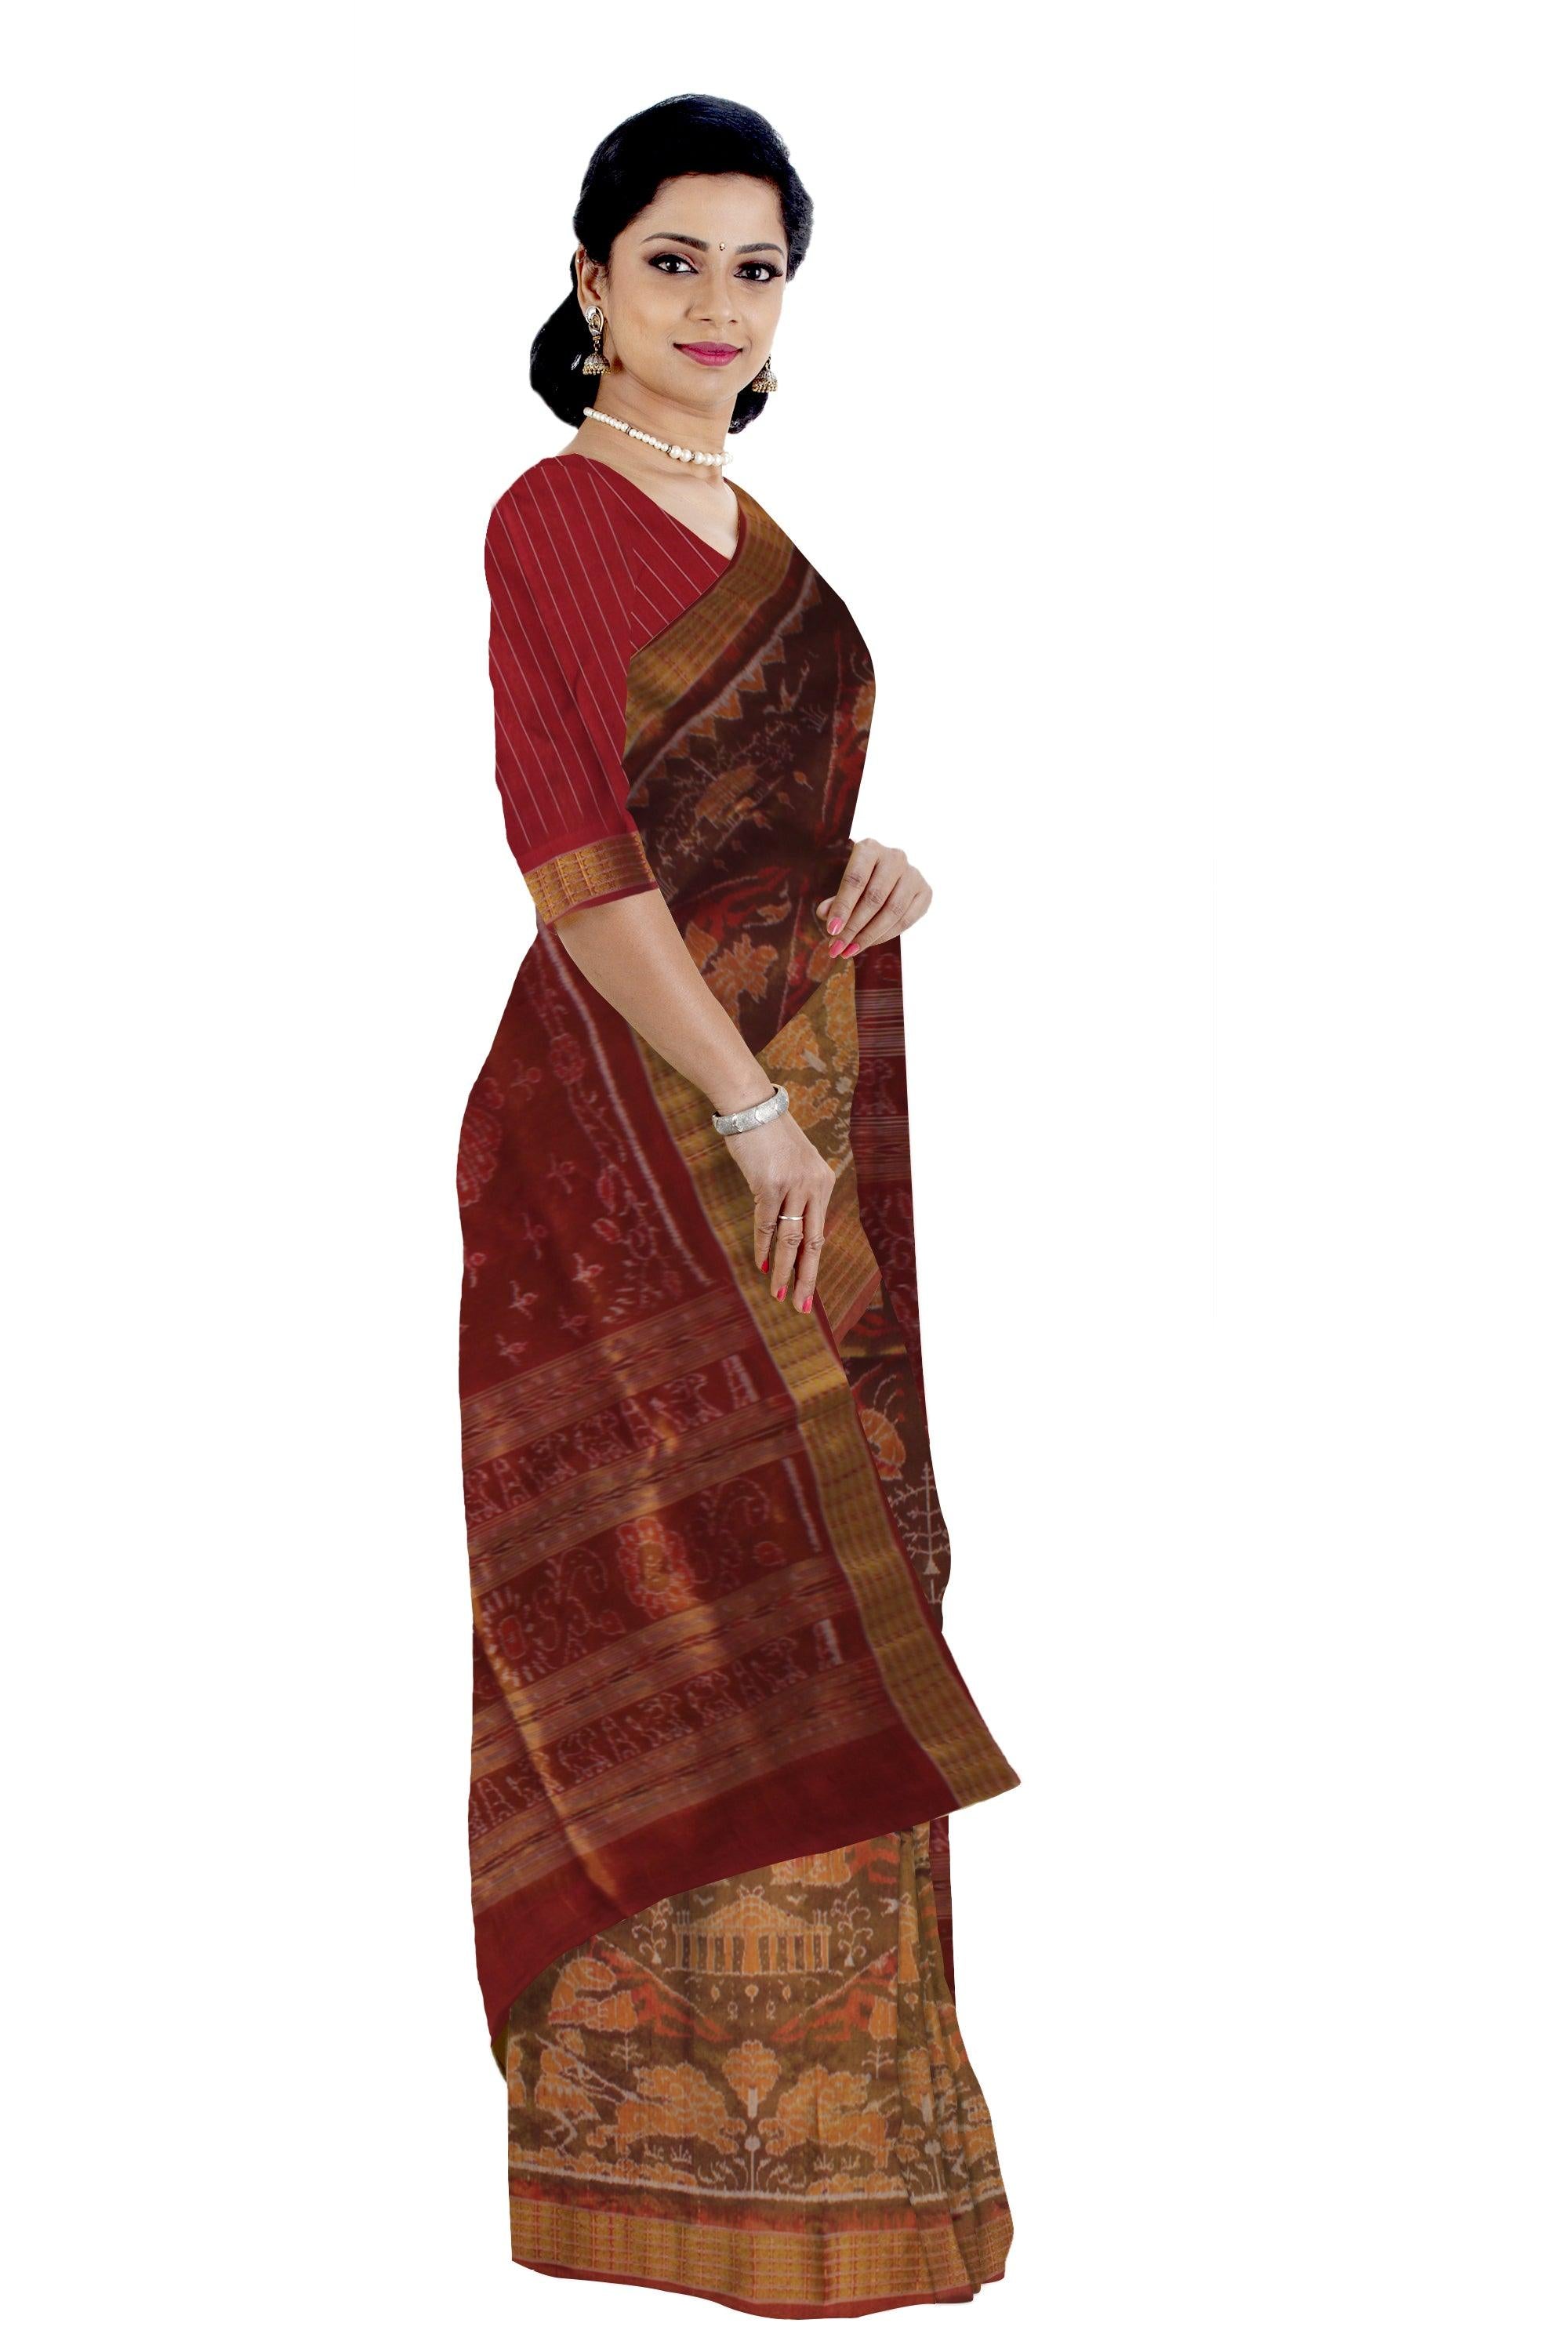 MARRAIGE COLLECTION TRADITIONAL VILLAGE PATTERN PURE TISSUE SILK SAREE IS BROWN AND MAROON COLOR BASE, ATTACHED WITH BLOUSE PIECE. - Koshali Arts & Crafts Enterprise